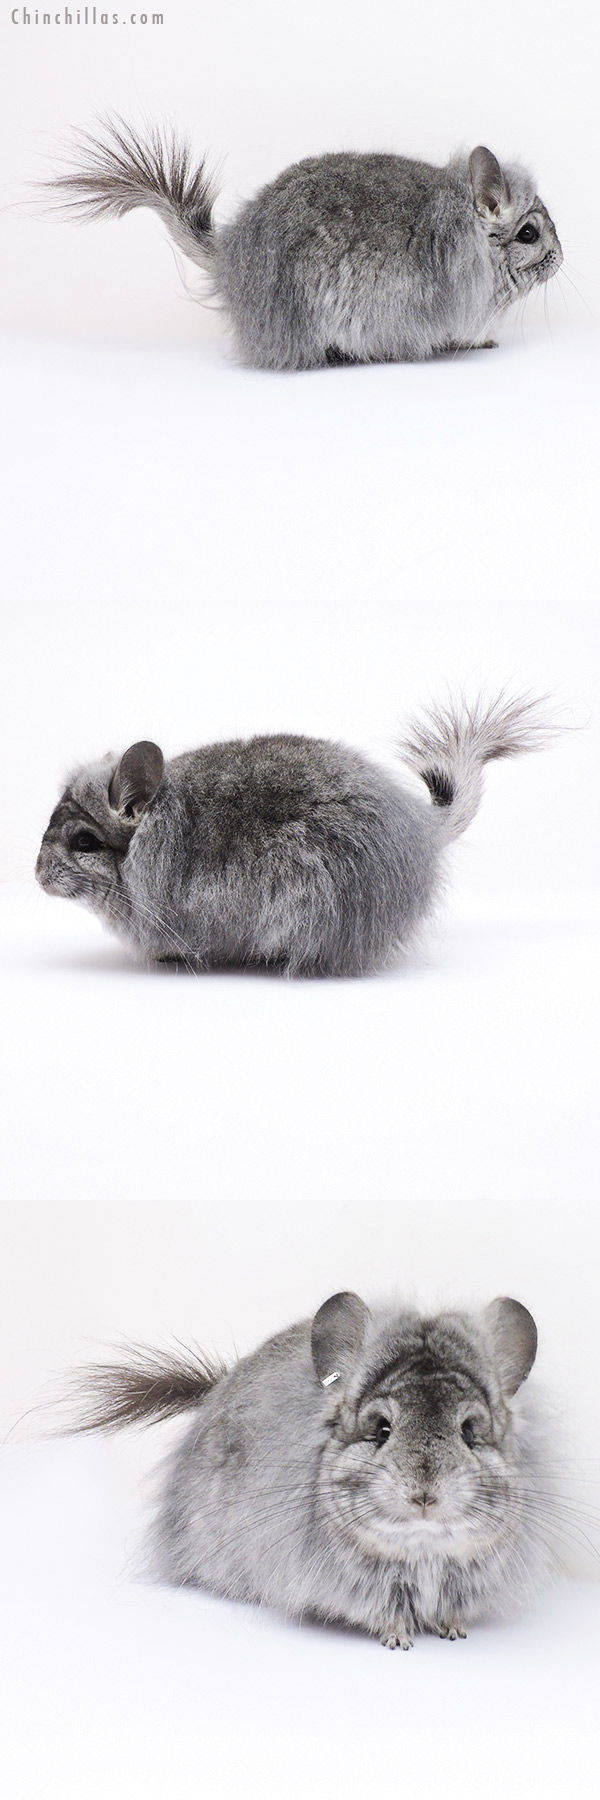 Chinchilla or related item offered for sale or export on Chinchillas.com - 19099 Exceptional Standard G3  Royal Persian Angora Female Chinchilla